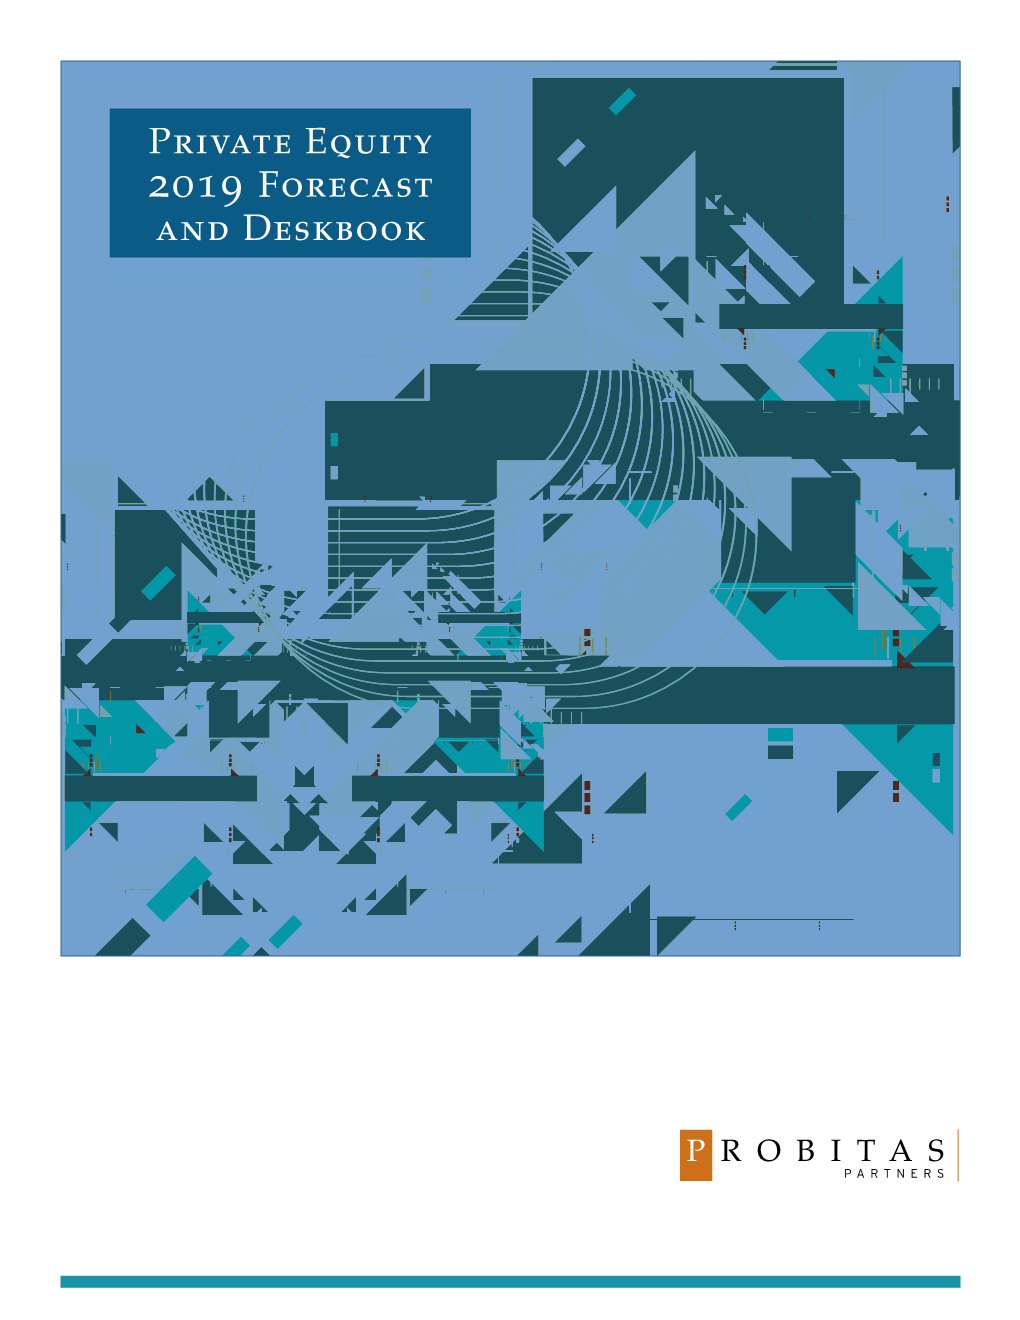 Private Equity 2019 Forecast and Deskbook